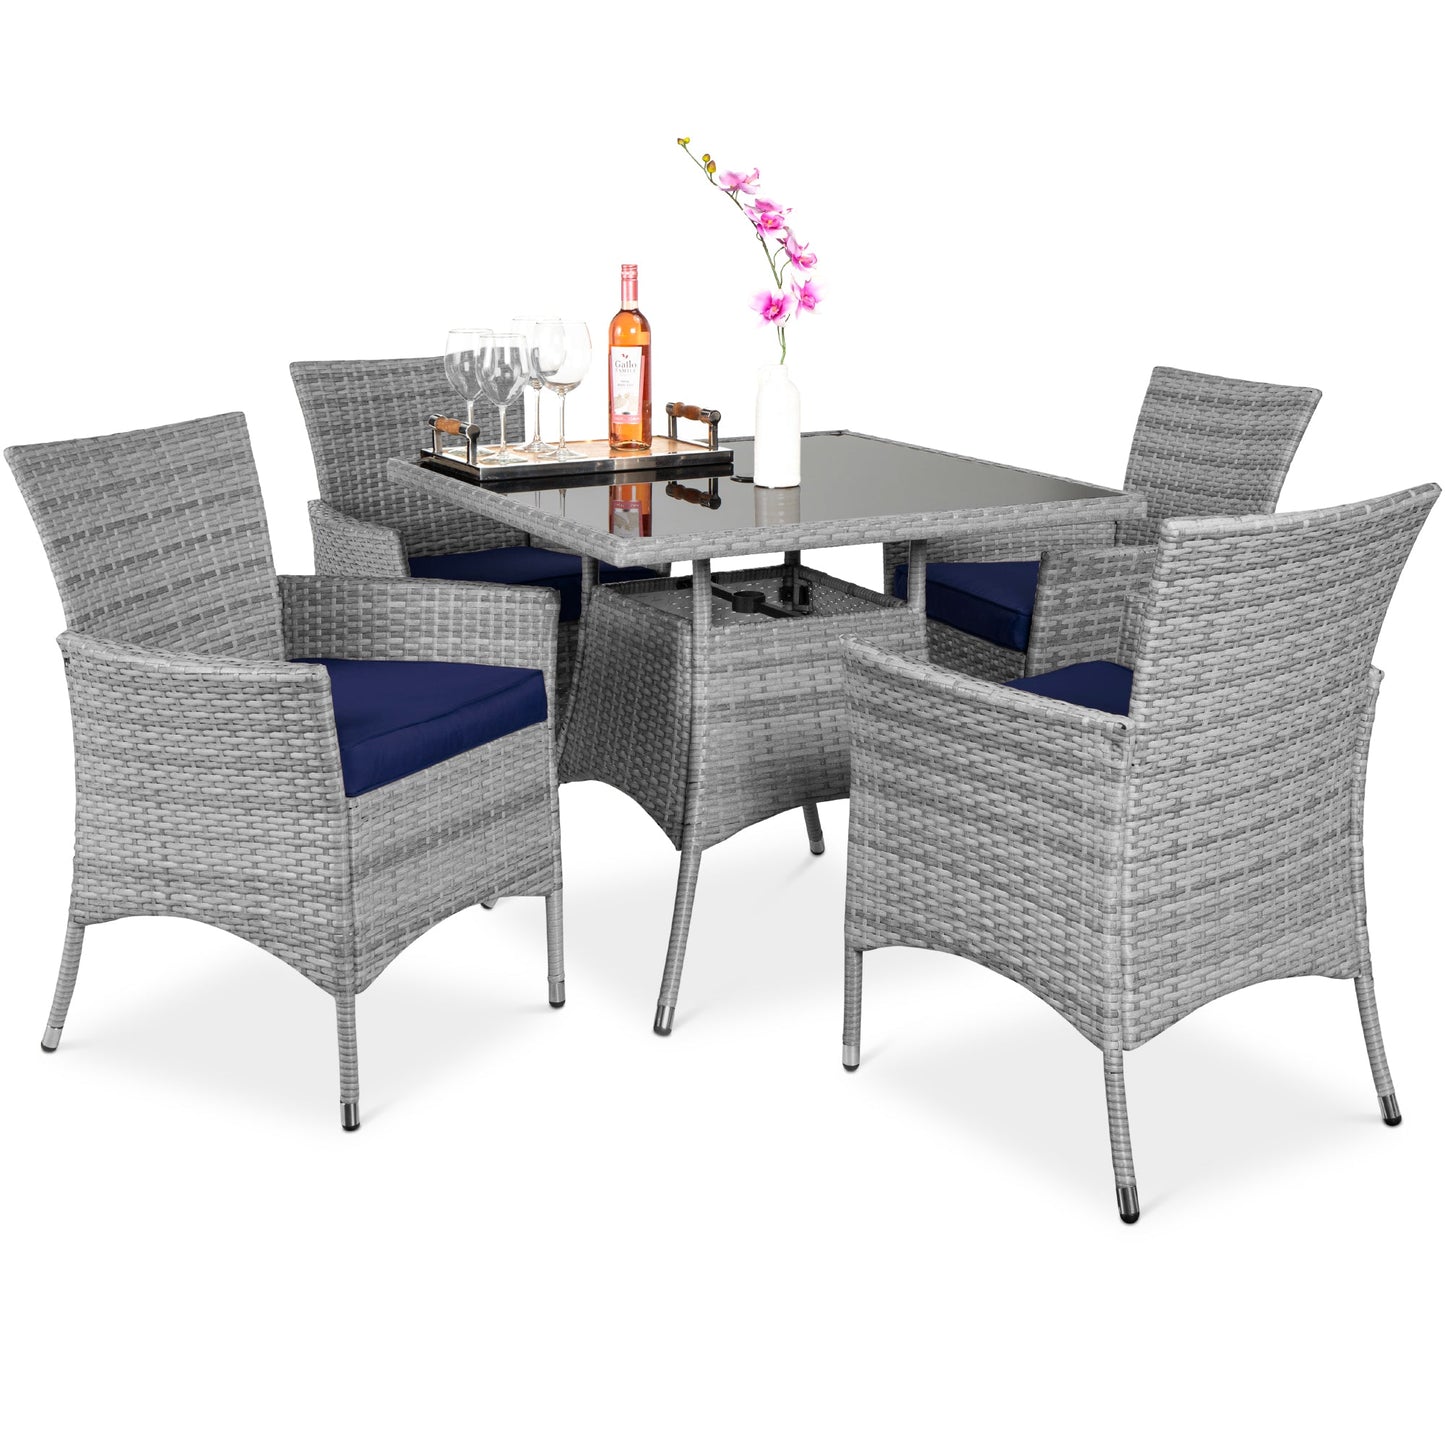 5-Piece Wicker Patio Dining Table Set w/ 4 Chairs